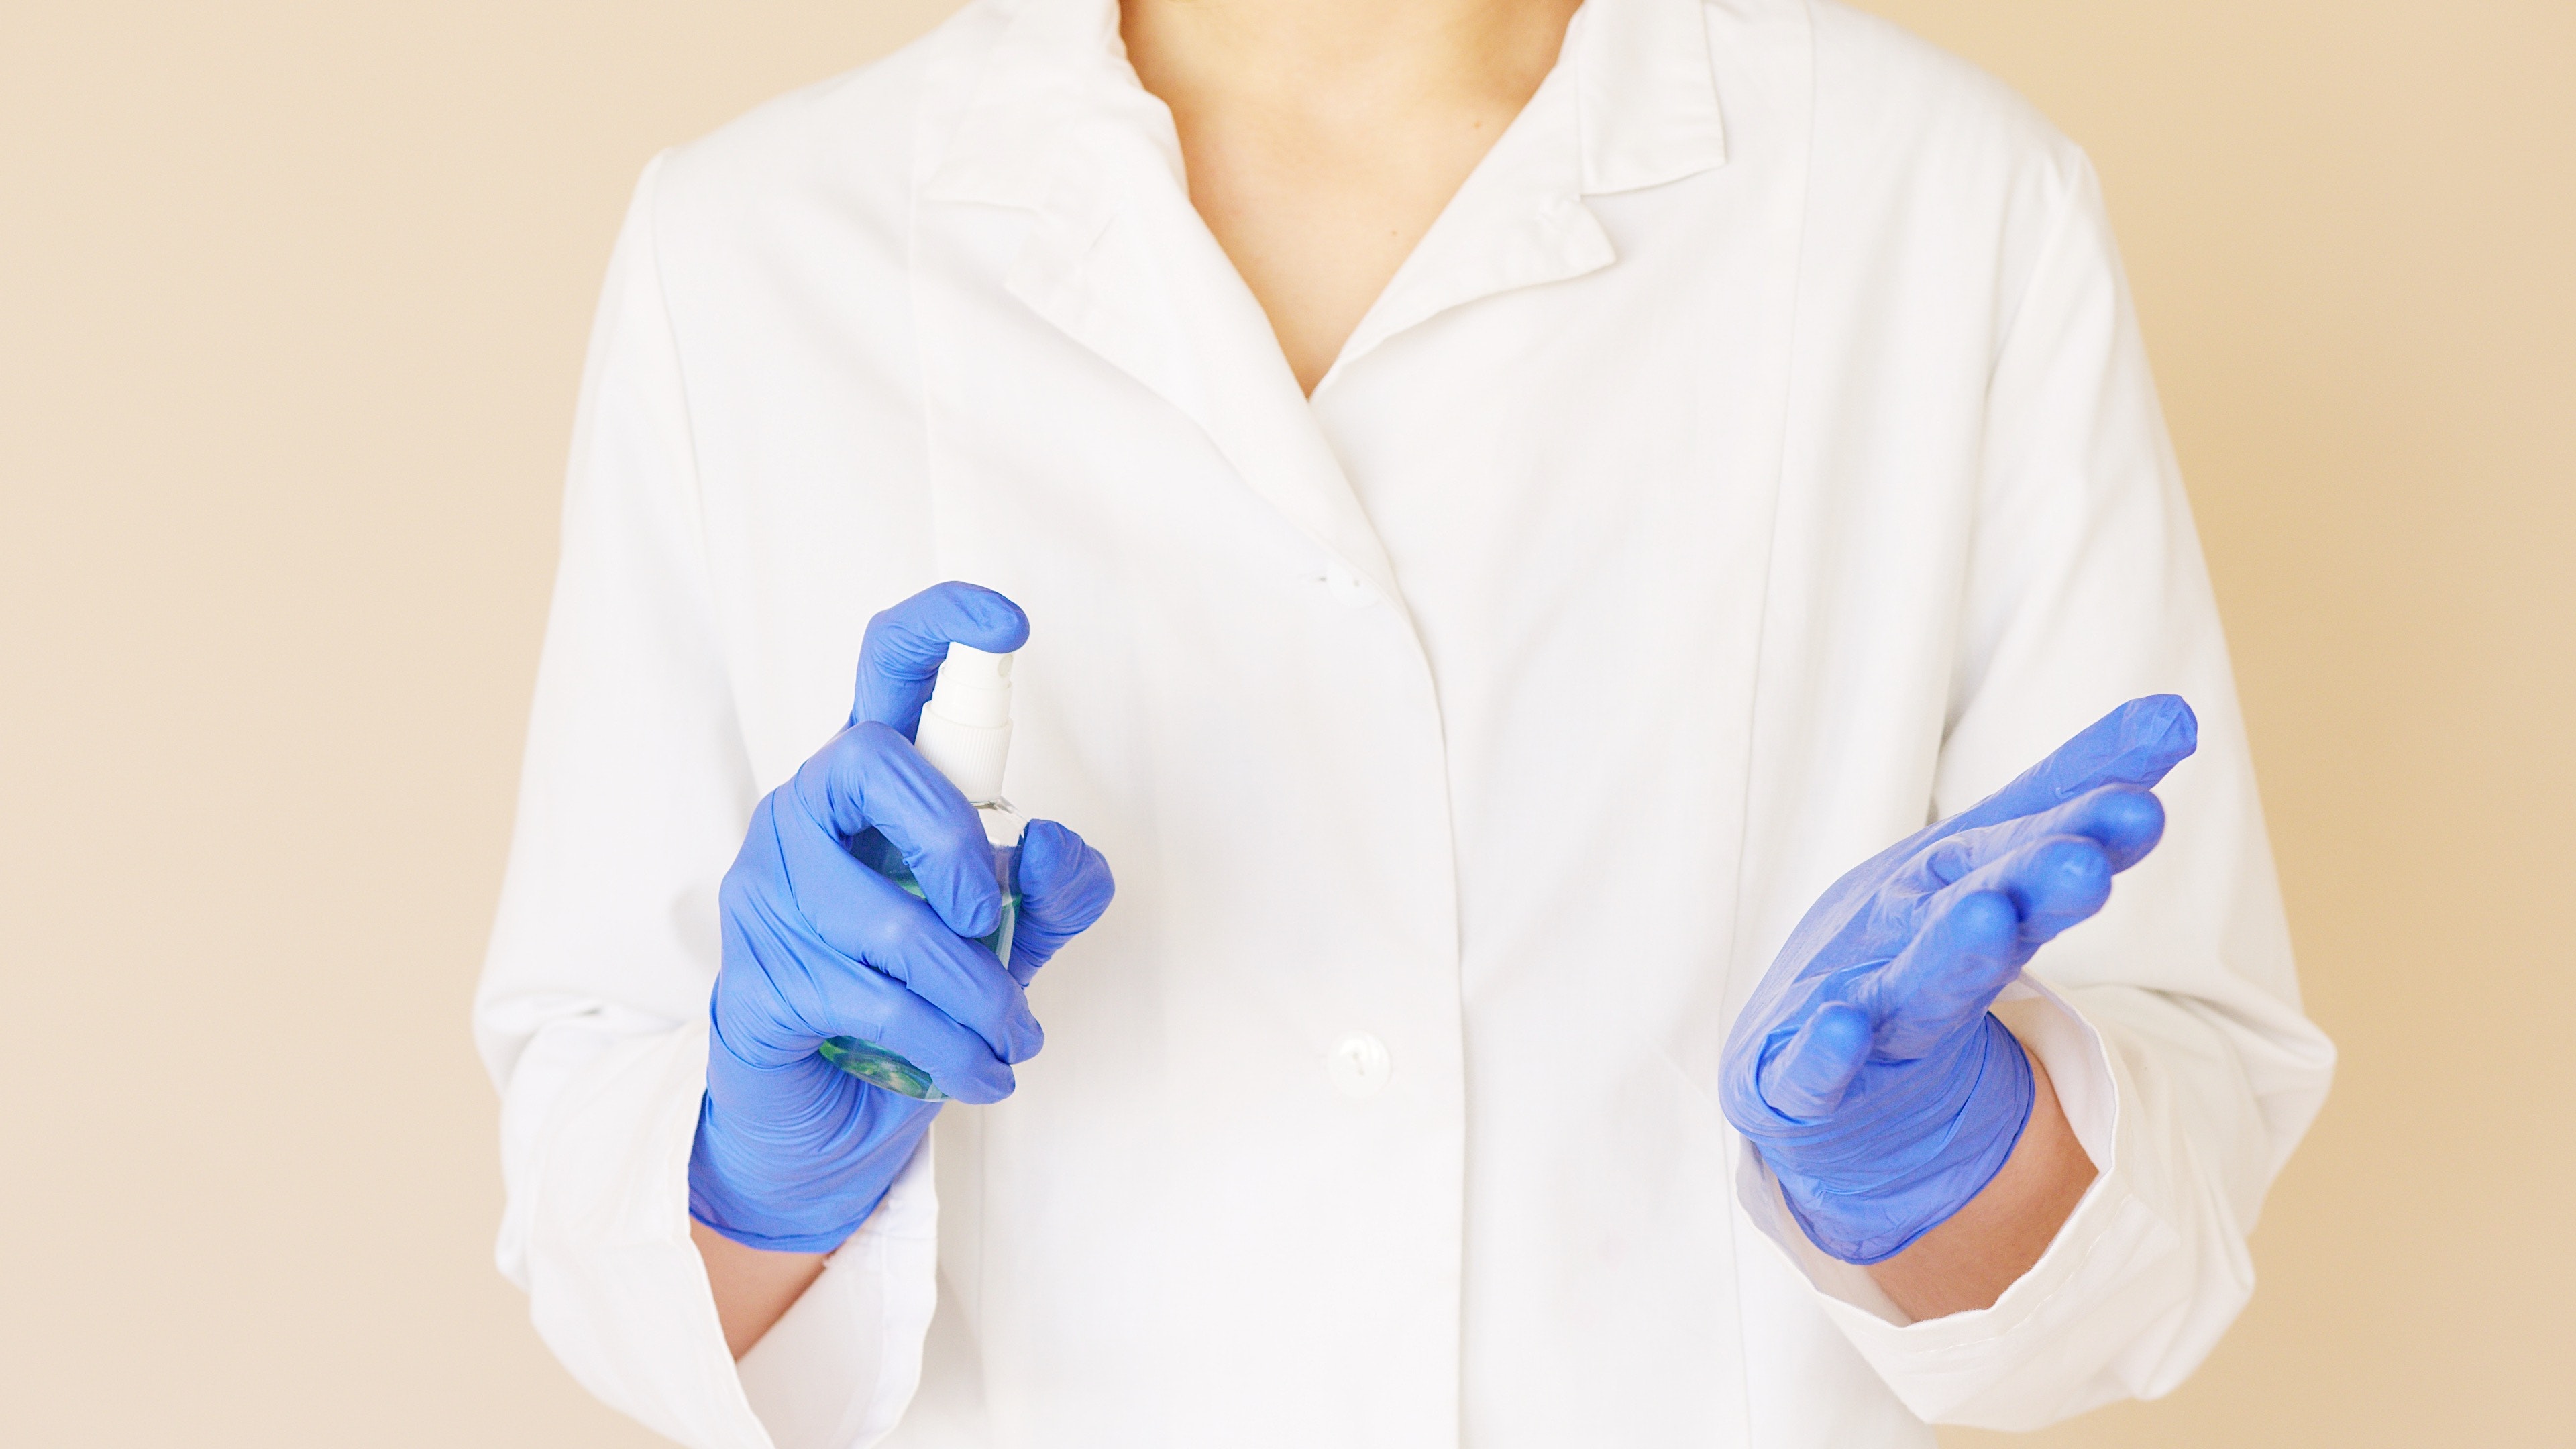 Study Confirms Hospital COVID-19 Cleaning Protocols